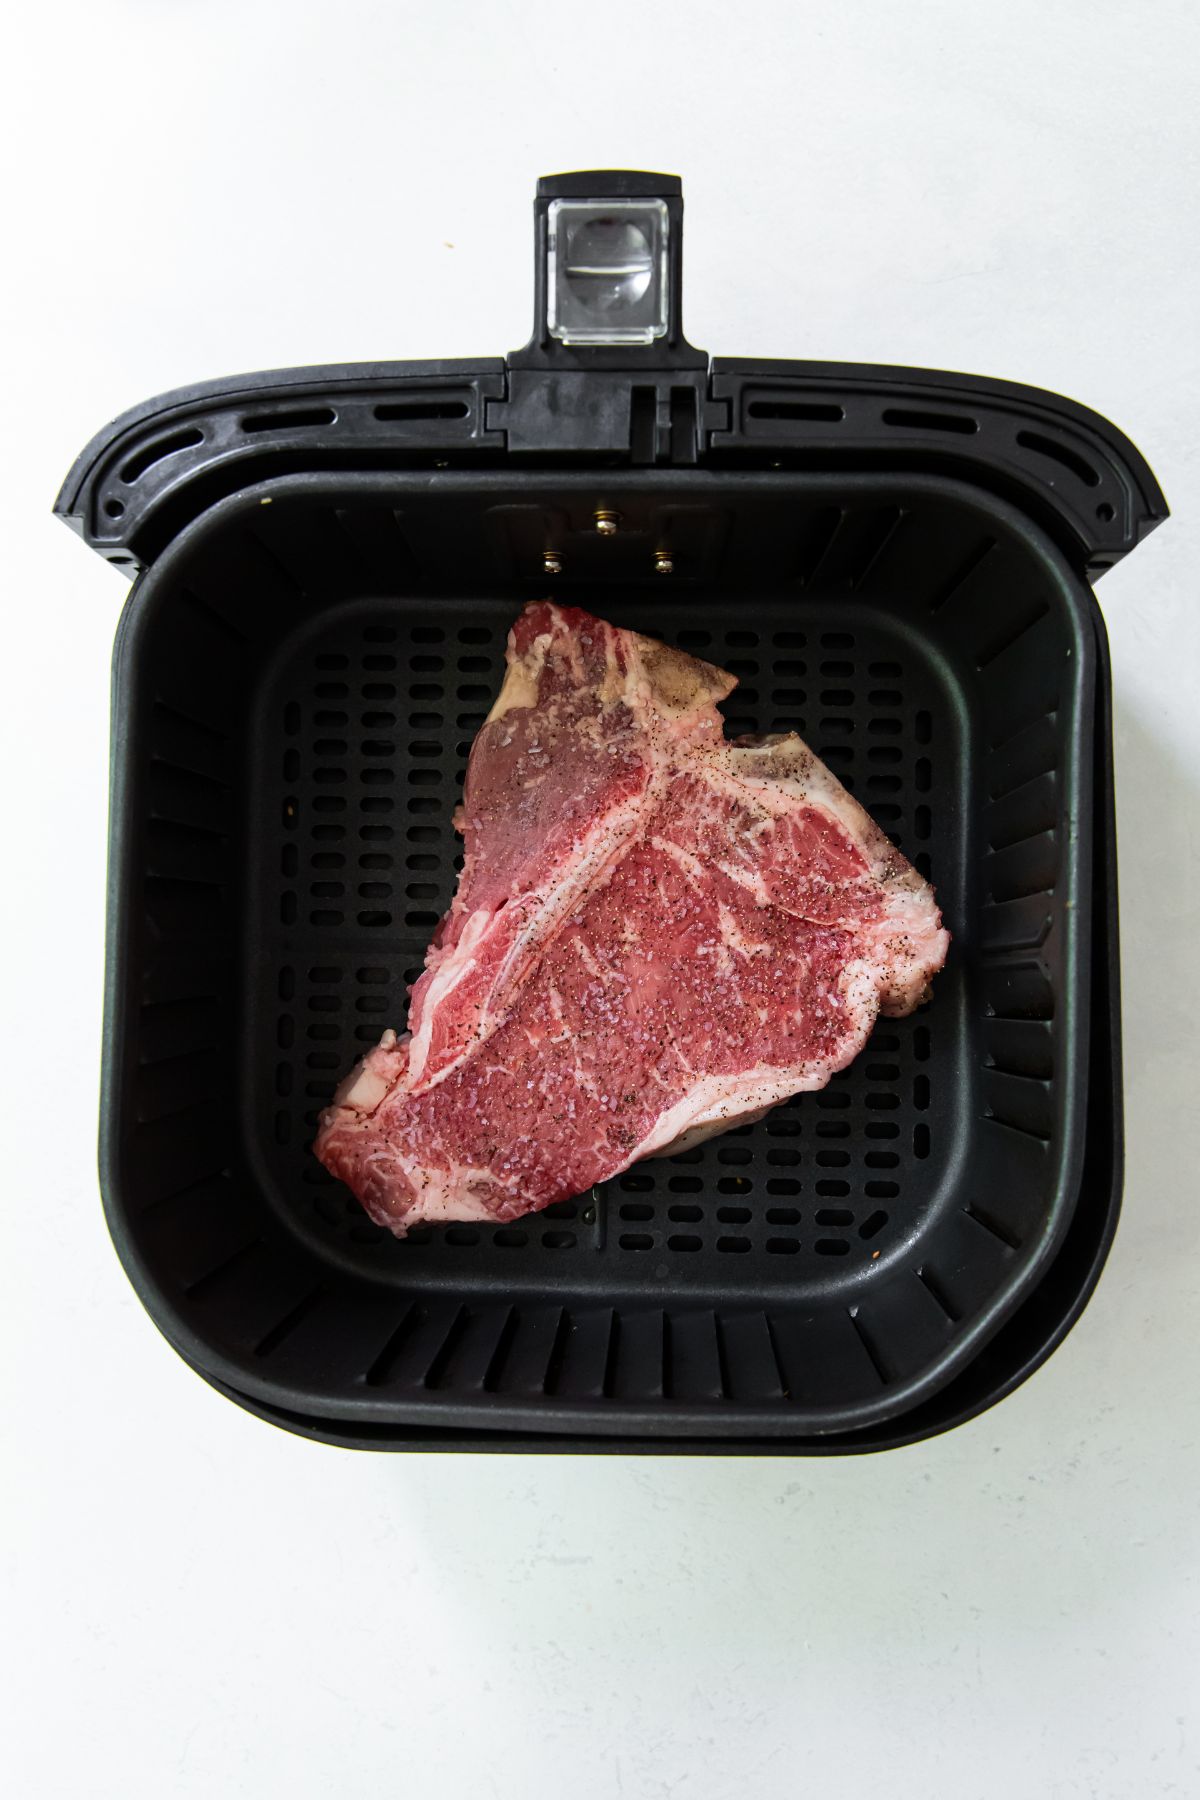 Transfer the cooked T-bone steak to a plate and enjoy!